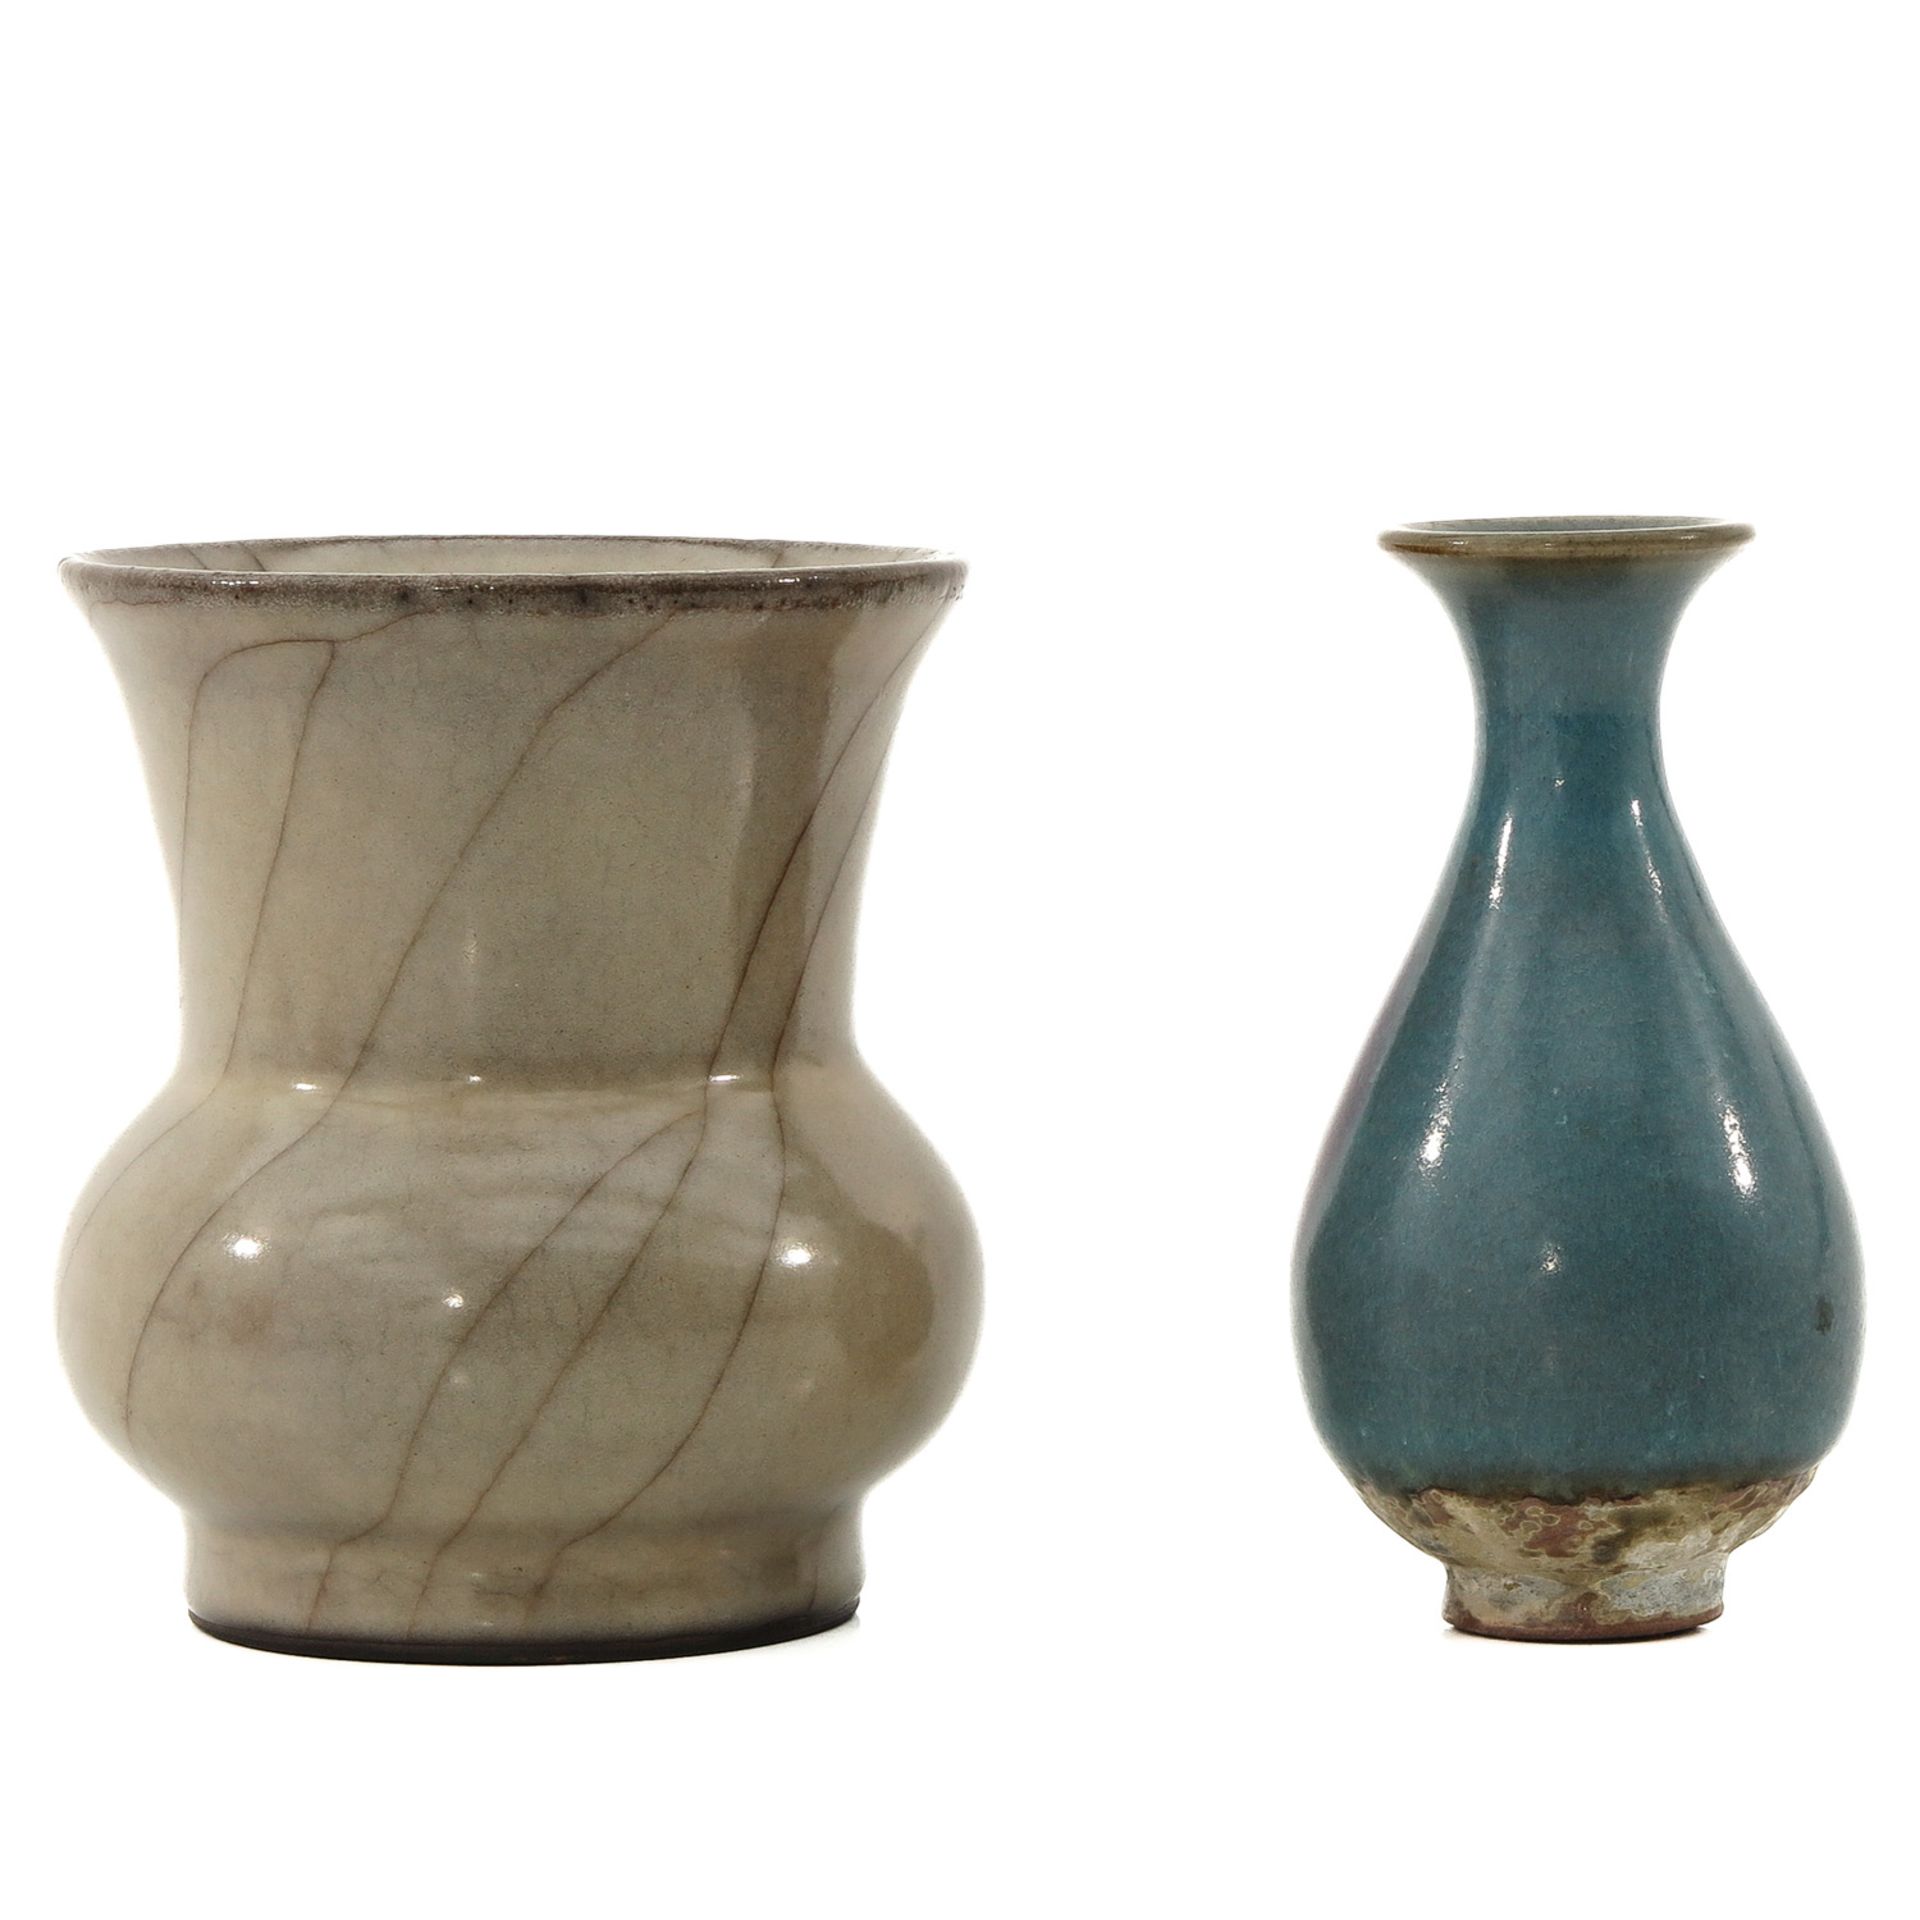 A Lot of 2 Small Vases - Image 2 of 10